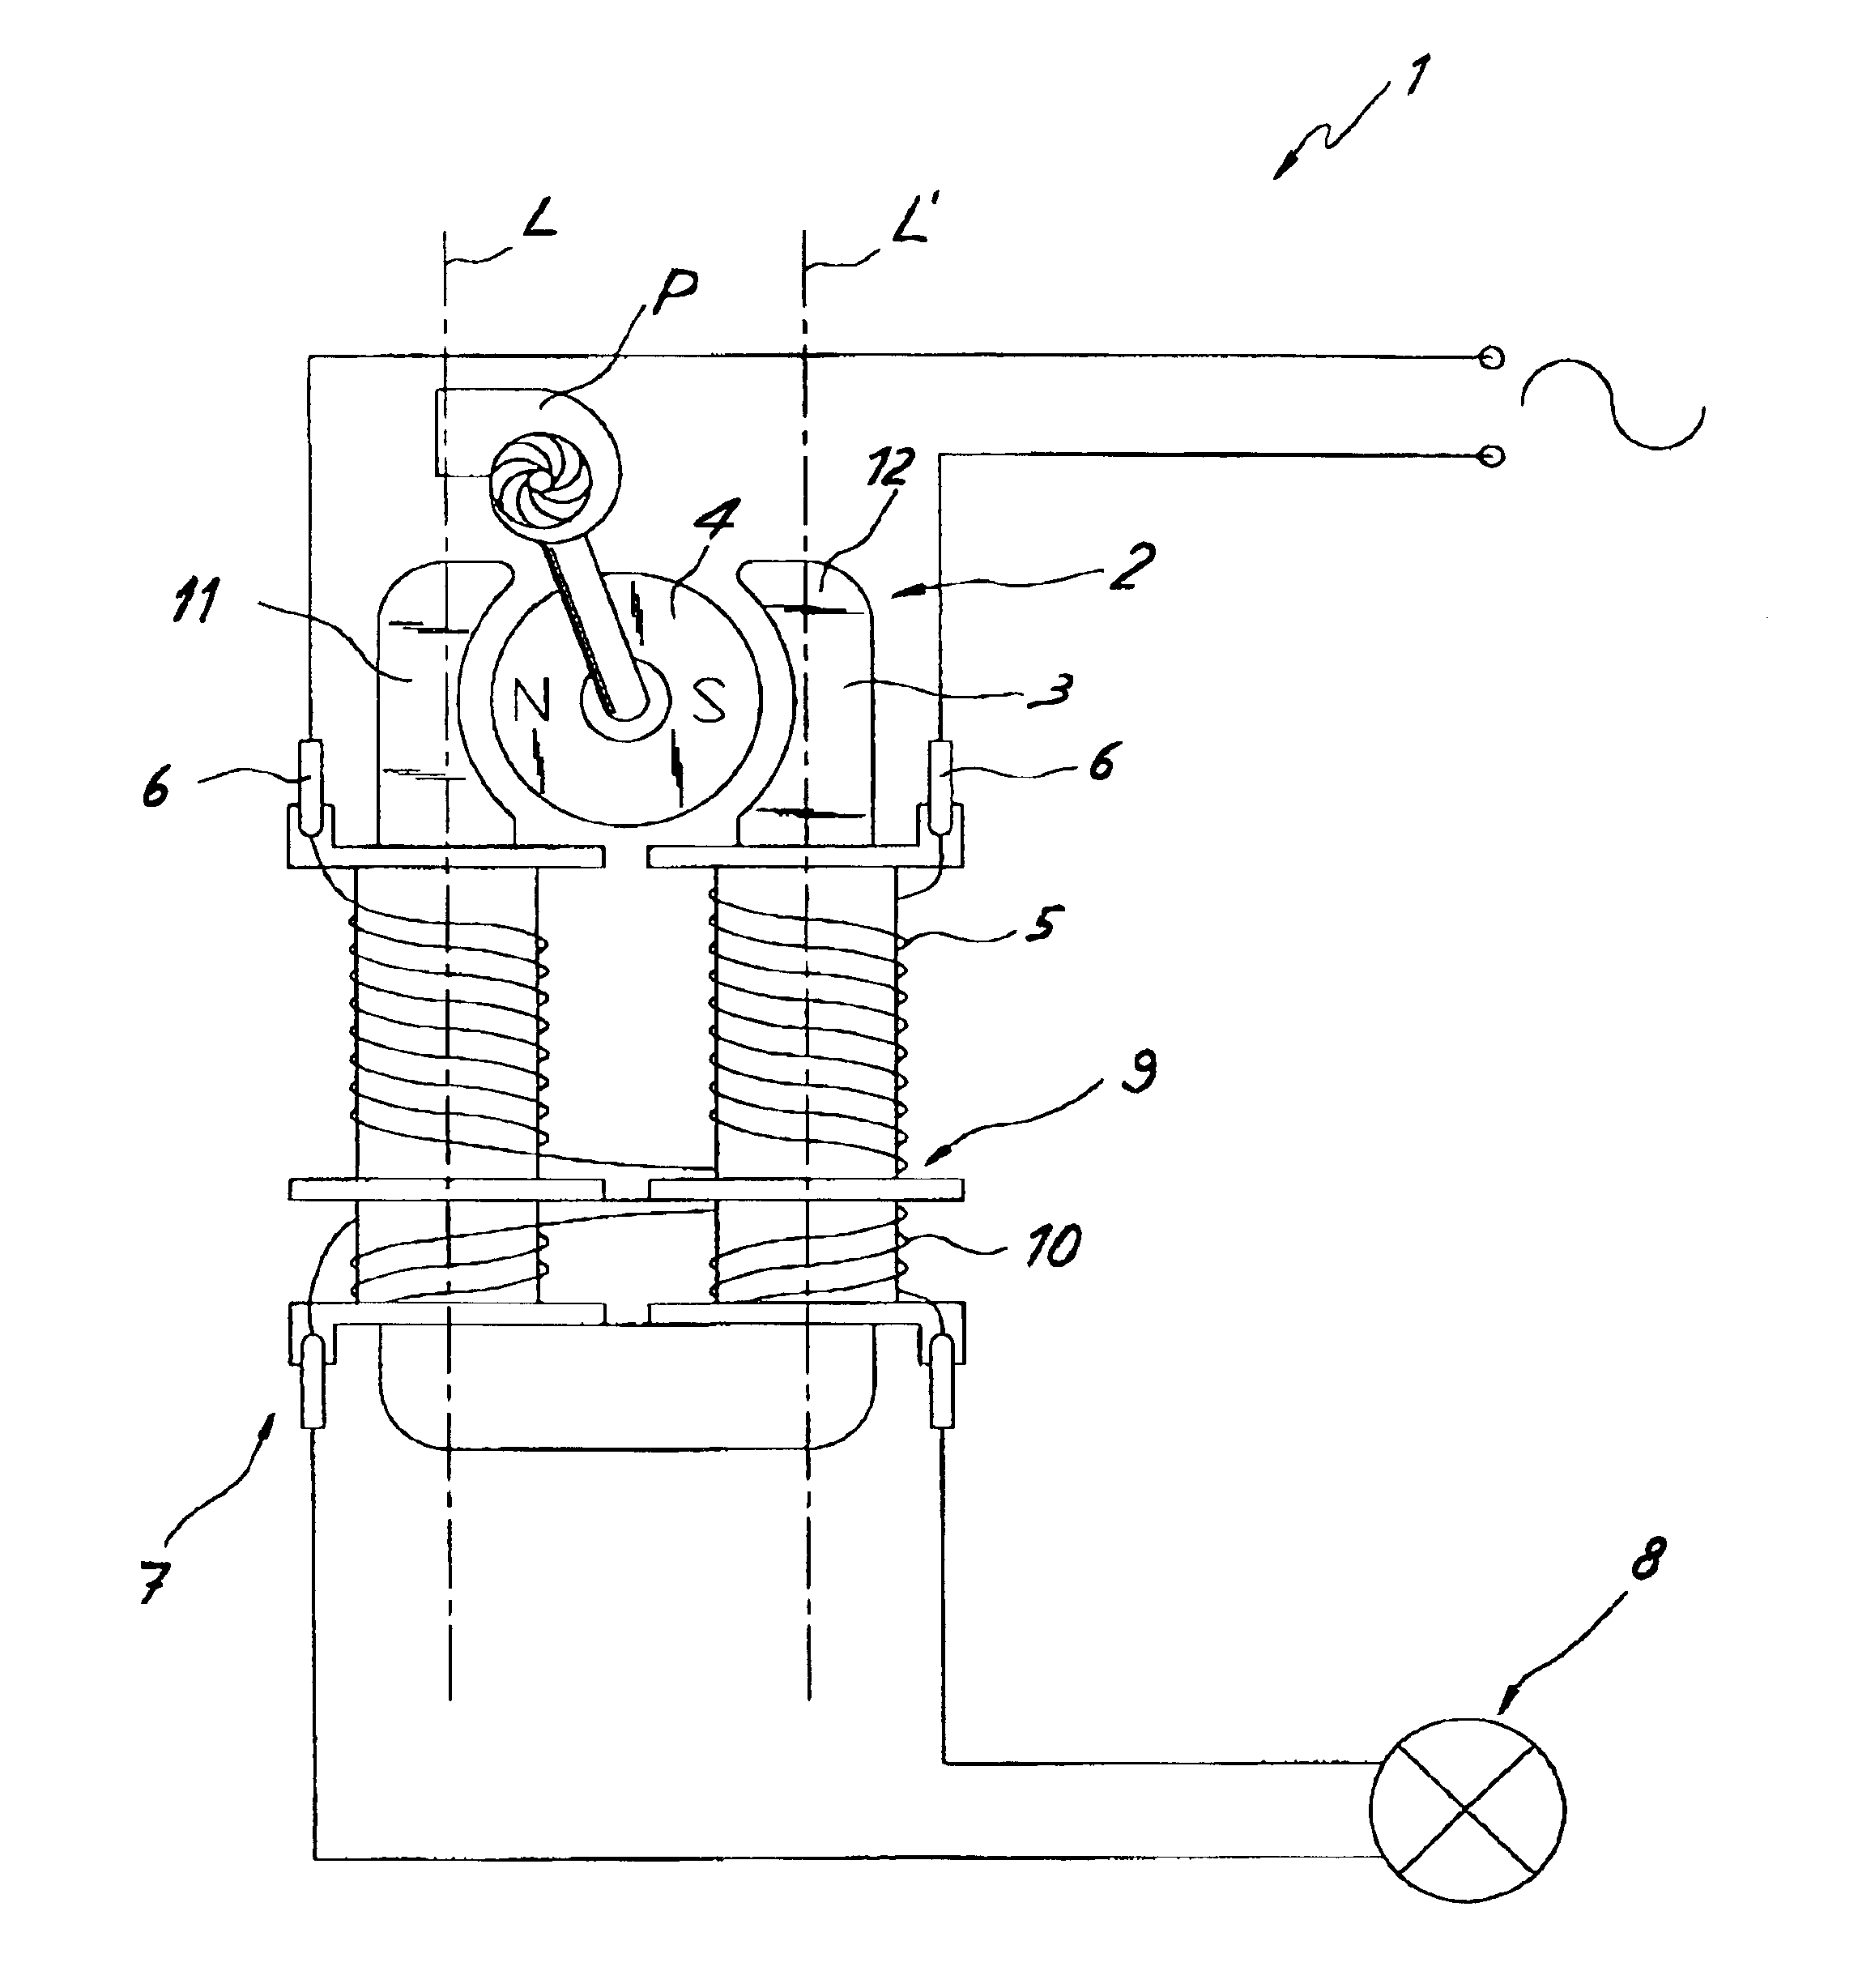 Multiple-function pumping device for fountains, ornamental fountains and the like